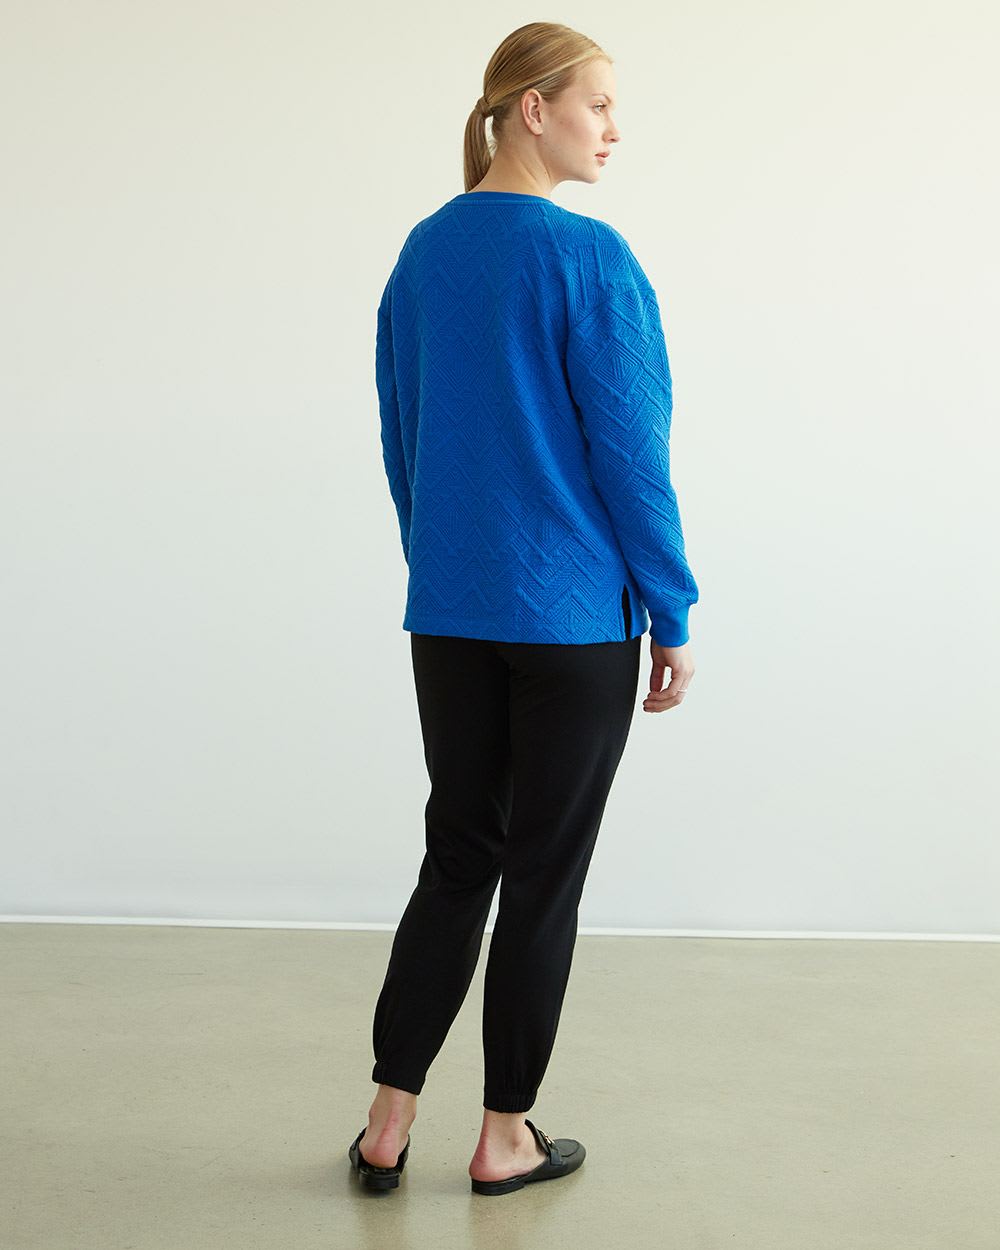 Long-Sleeve Quilted Knit Sweatshirt with Crew Neckline